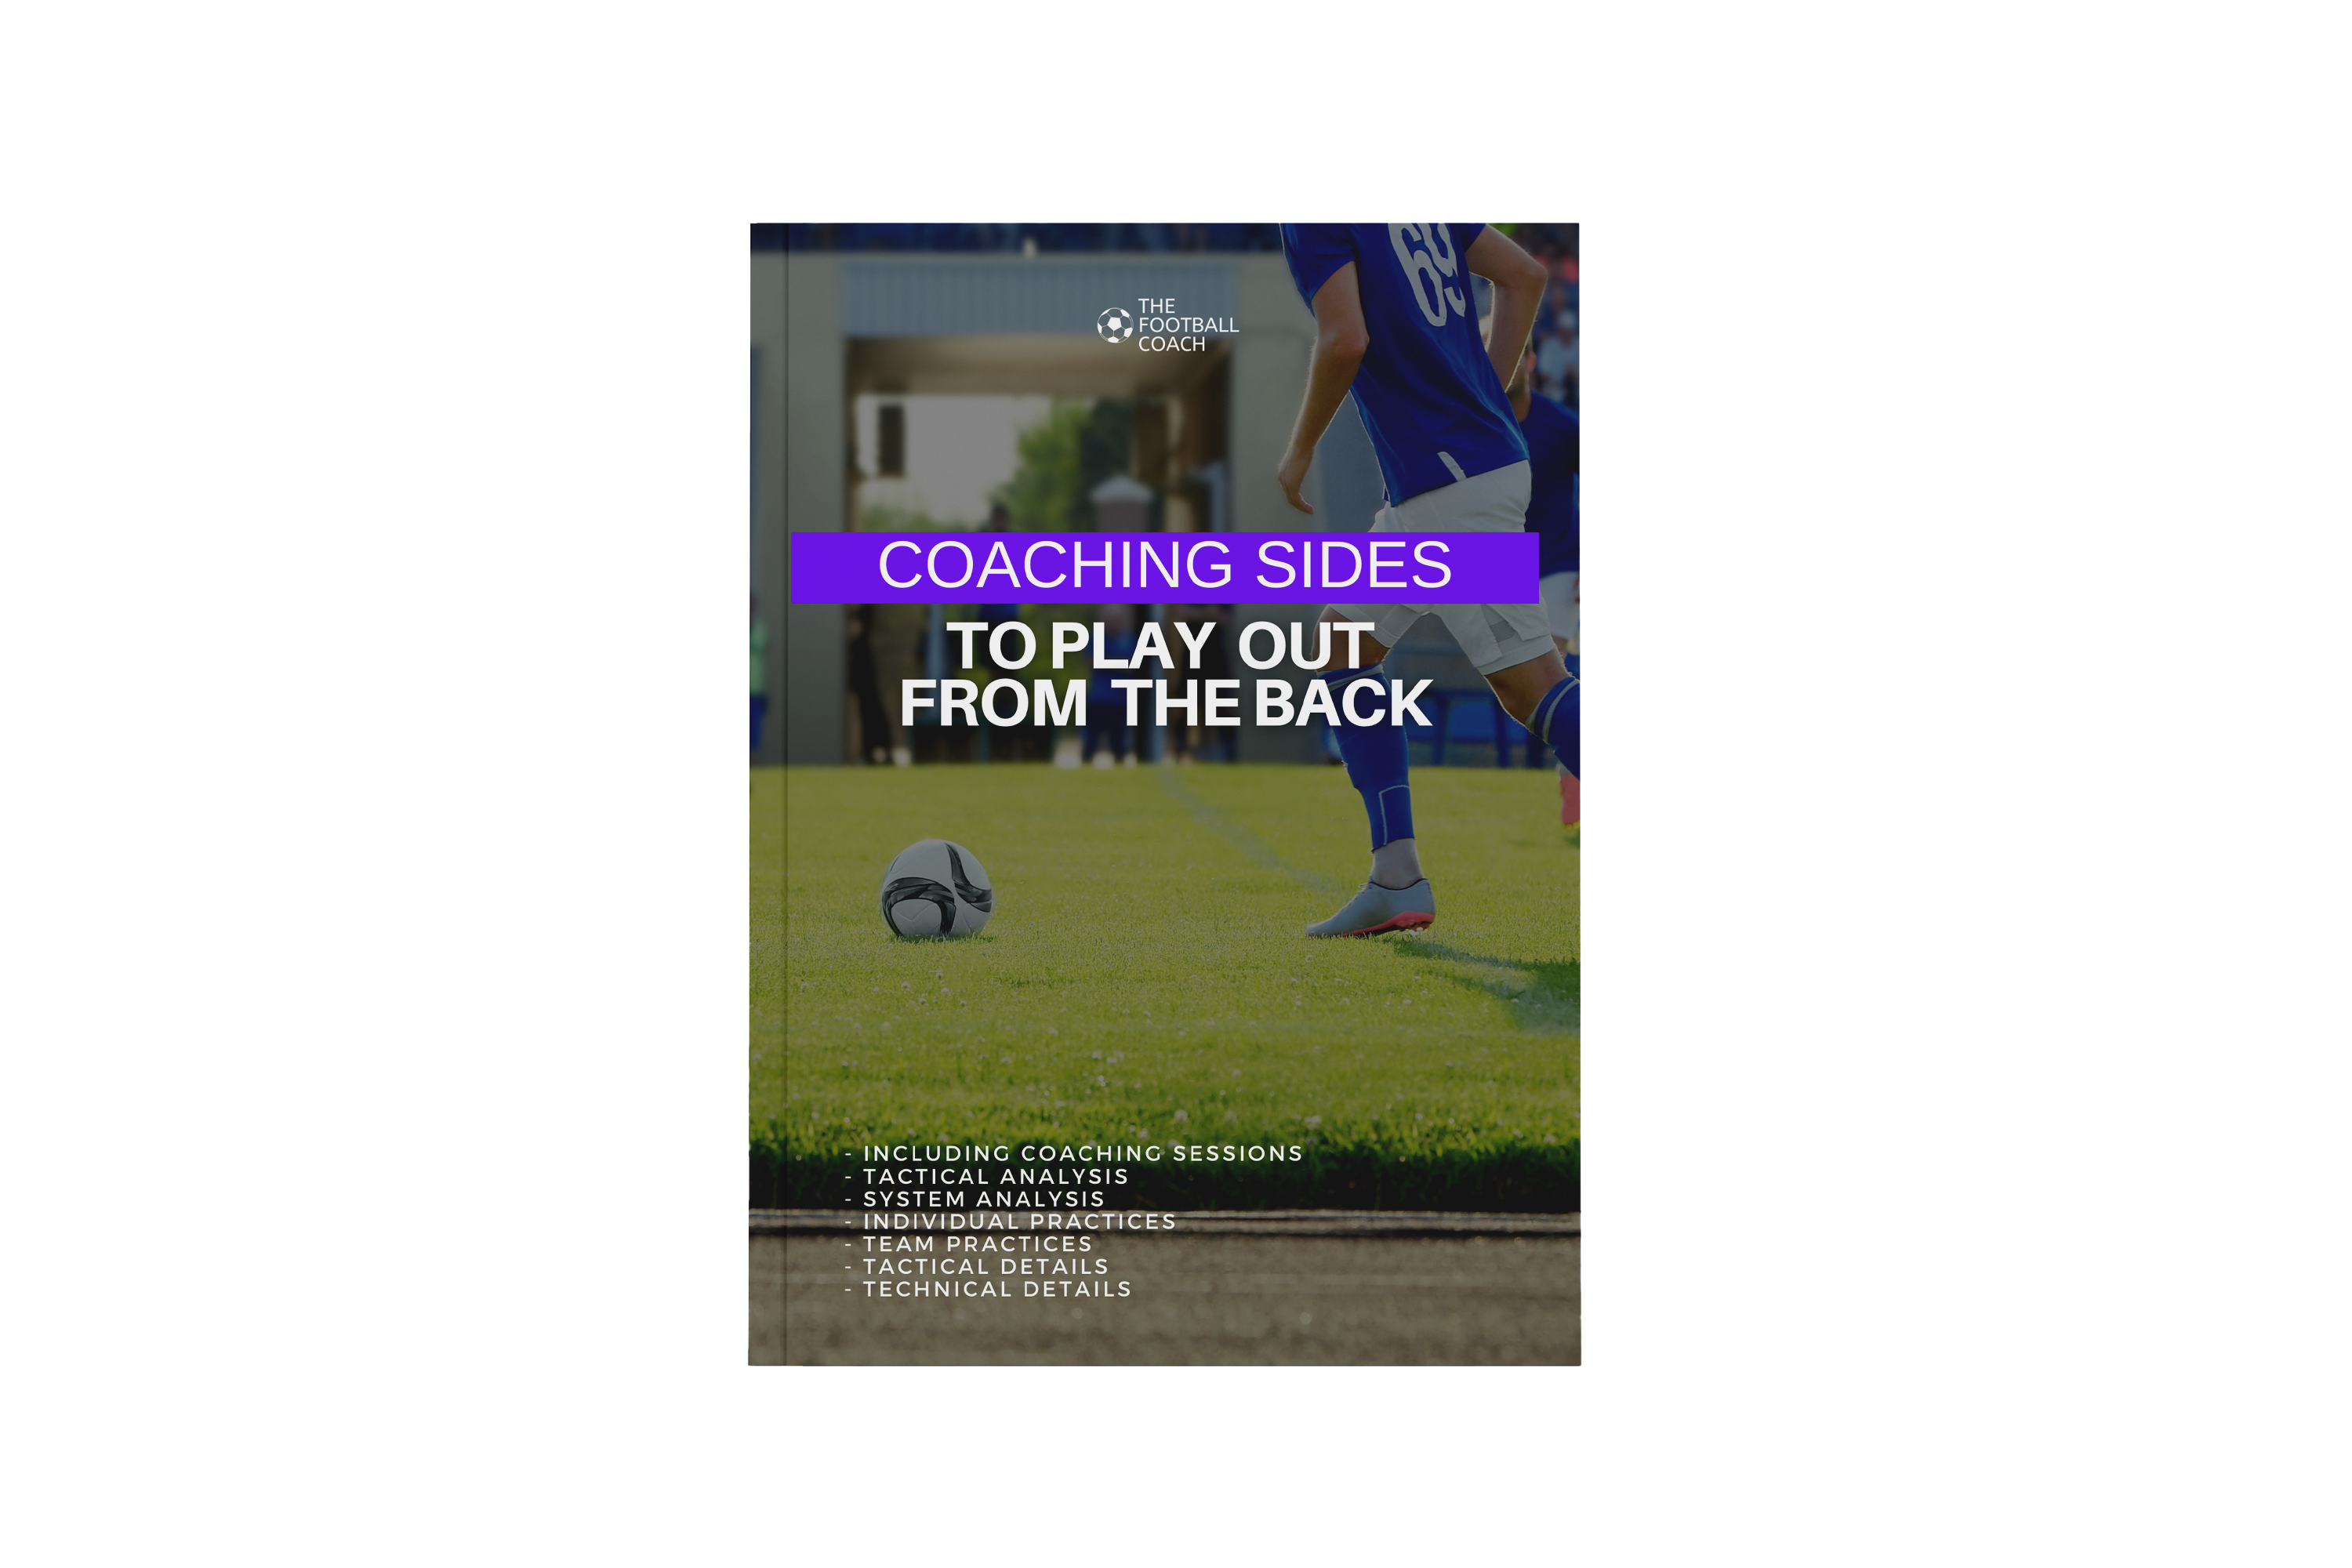 The Platinum Coaching Pack - Limited Edition (Black Friday)